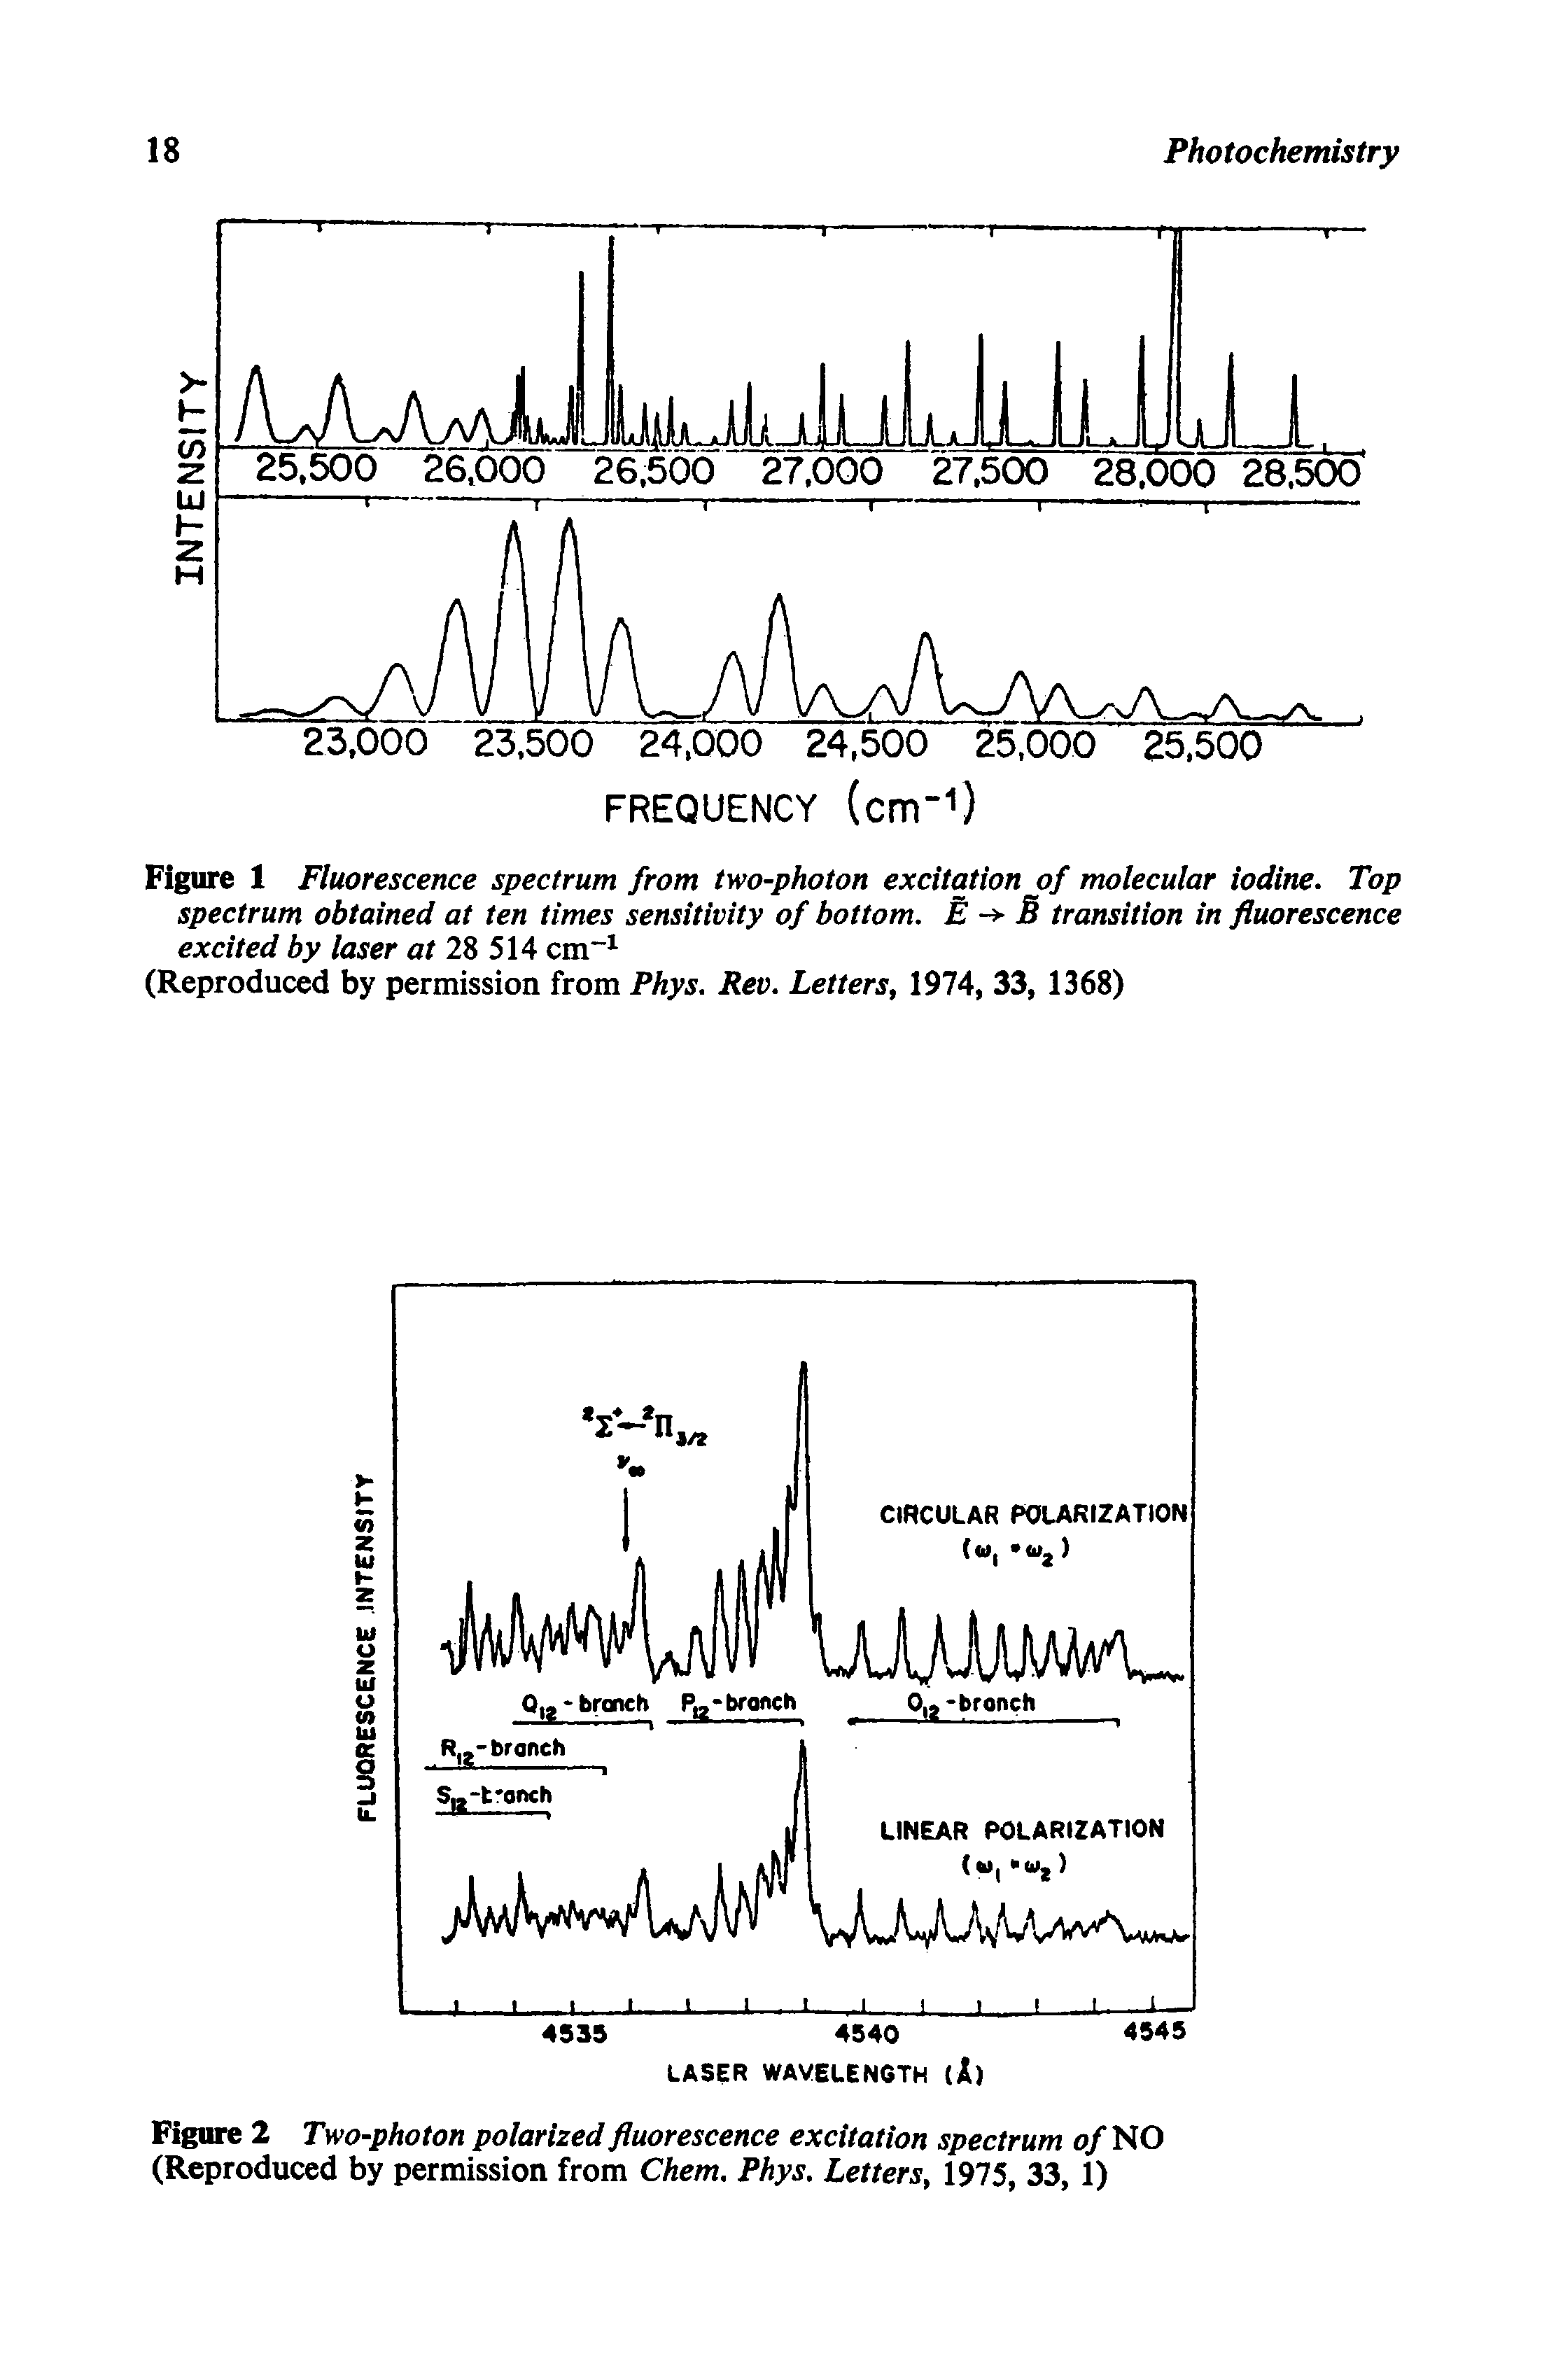 Figure 2 Two-photon polarized fluorescence excitation spectrum of NO (Reproduced by permission from Chem. Phys. Letters, 1975, 33, 1)...